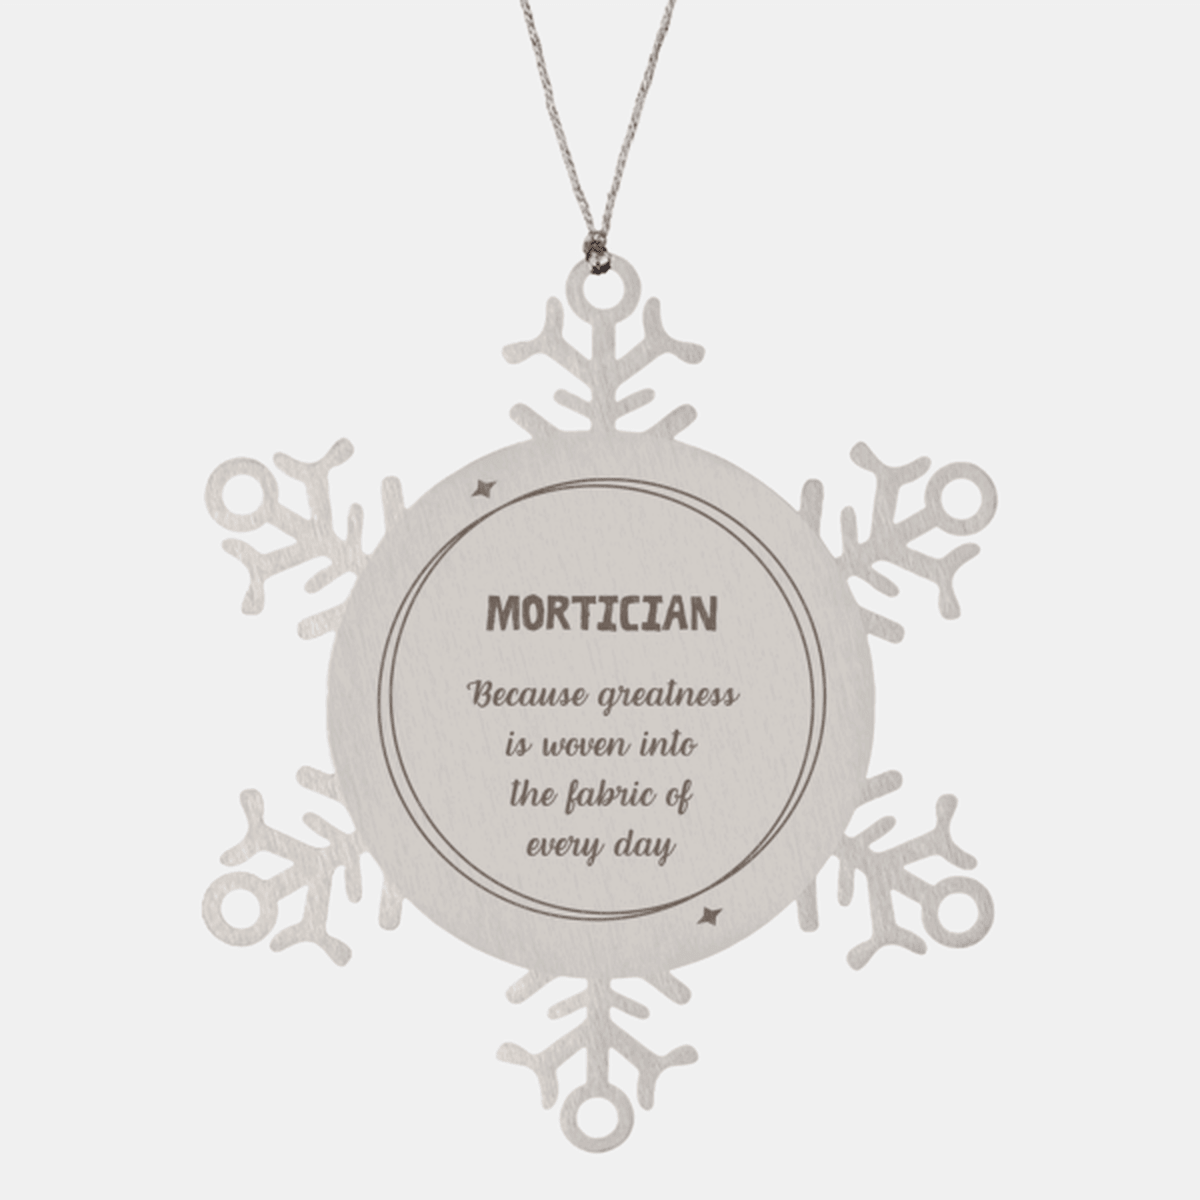 Sarcastic Mortician Snowflake Ornament Gifts, Christmas Holiday Gifts for Mortician Ornament, Mortician: Because greatness is woven into the fabric of every day, Coworkers, Friends - Mallard Moon Gift Shop